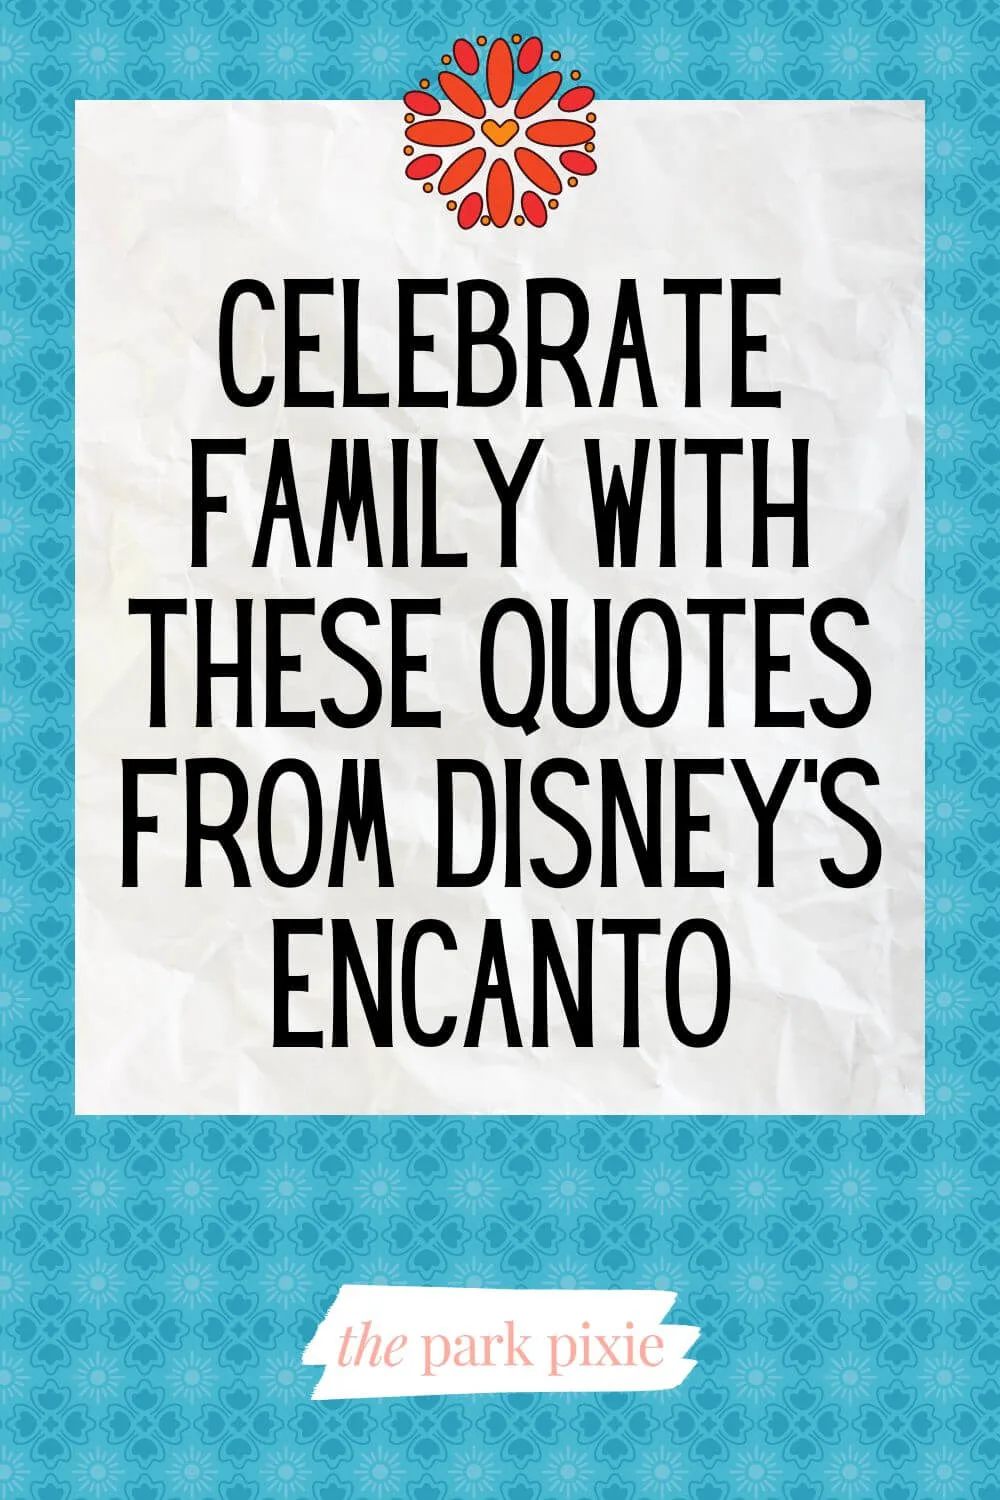 Graphic with a turquoise background with a red flower at the top. Text in the middle reads "Celebrate Family with These Quotes from Disney's Encanto."